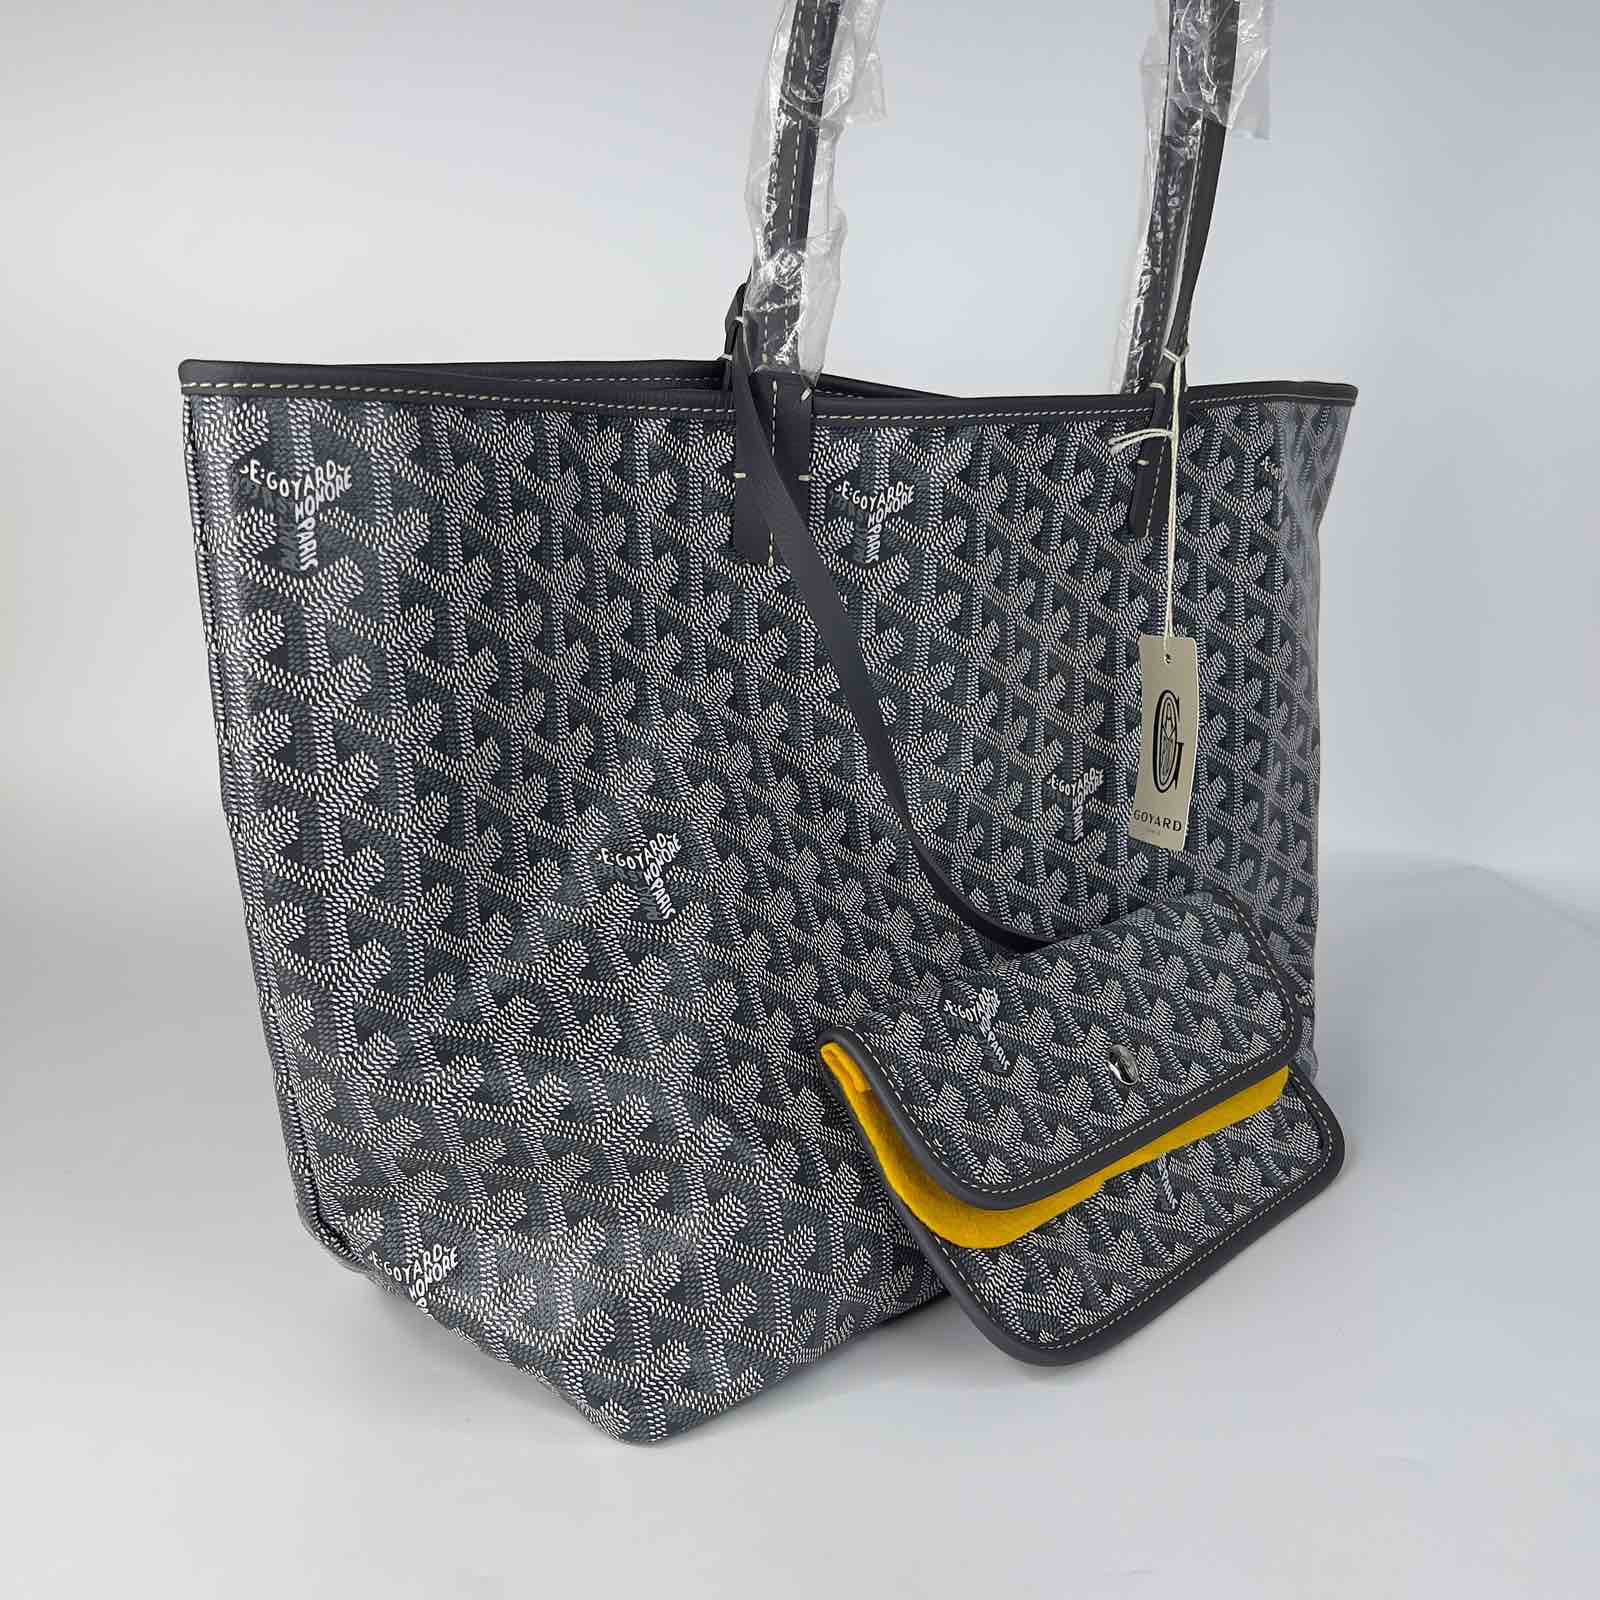 Authentic Goyard PM in grey. Limited color, hard to find. Comes with  dustbag, shopping bag, cards, tag and free bag organizer PHP 57.899